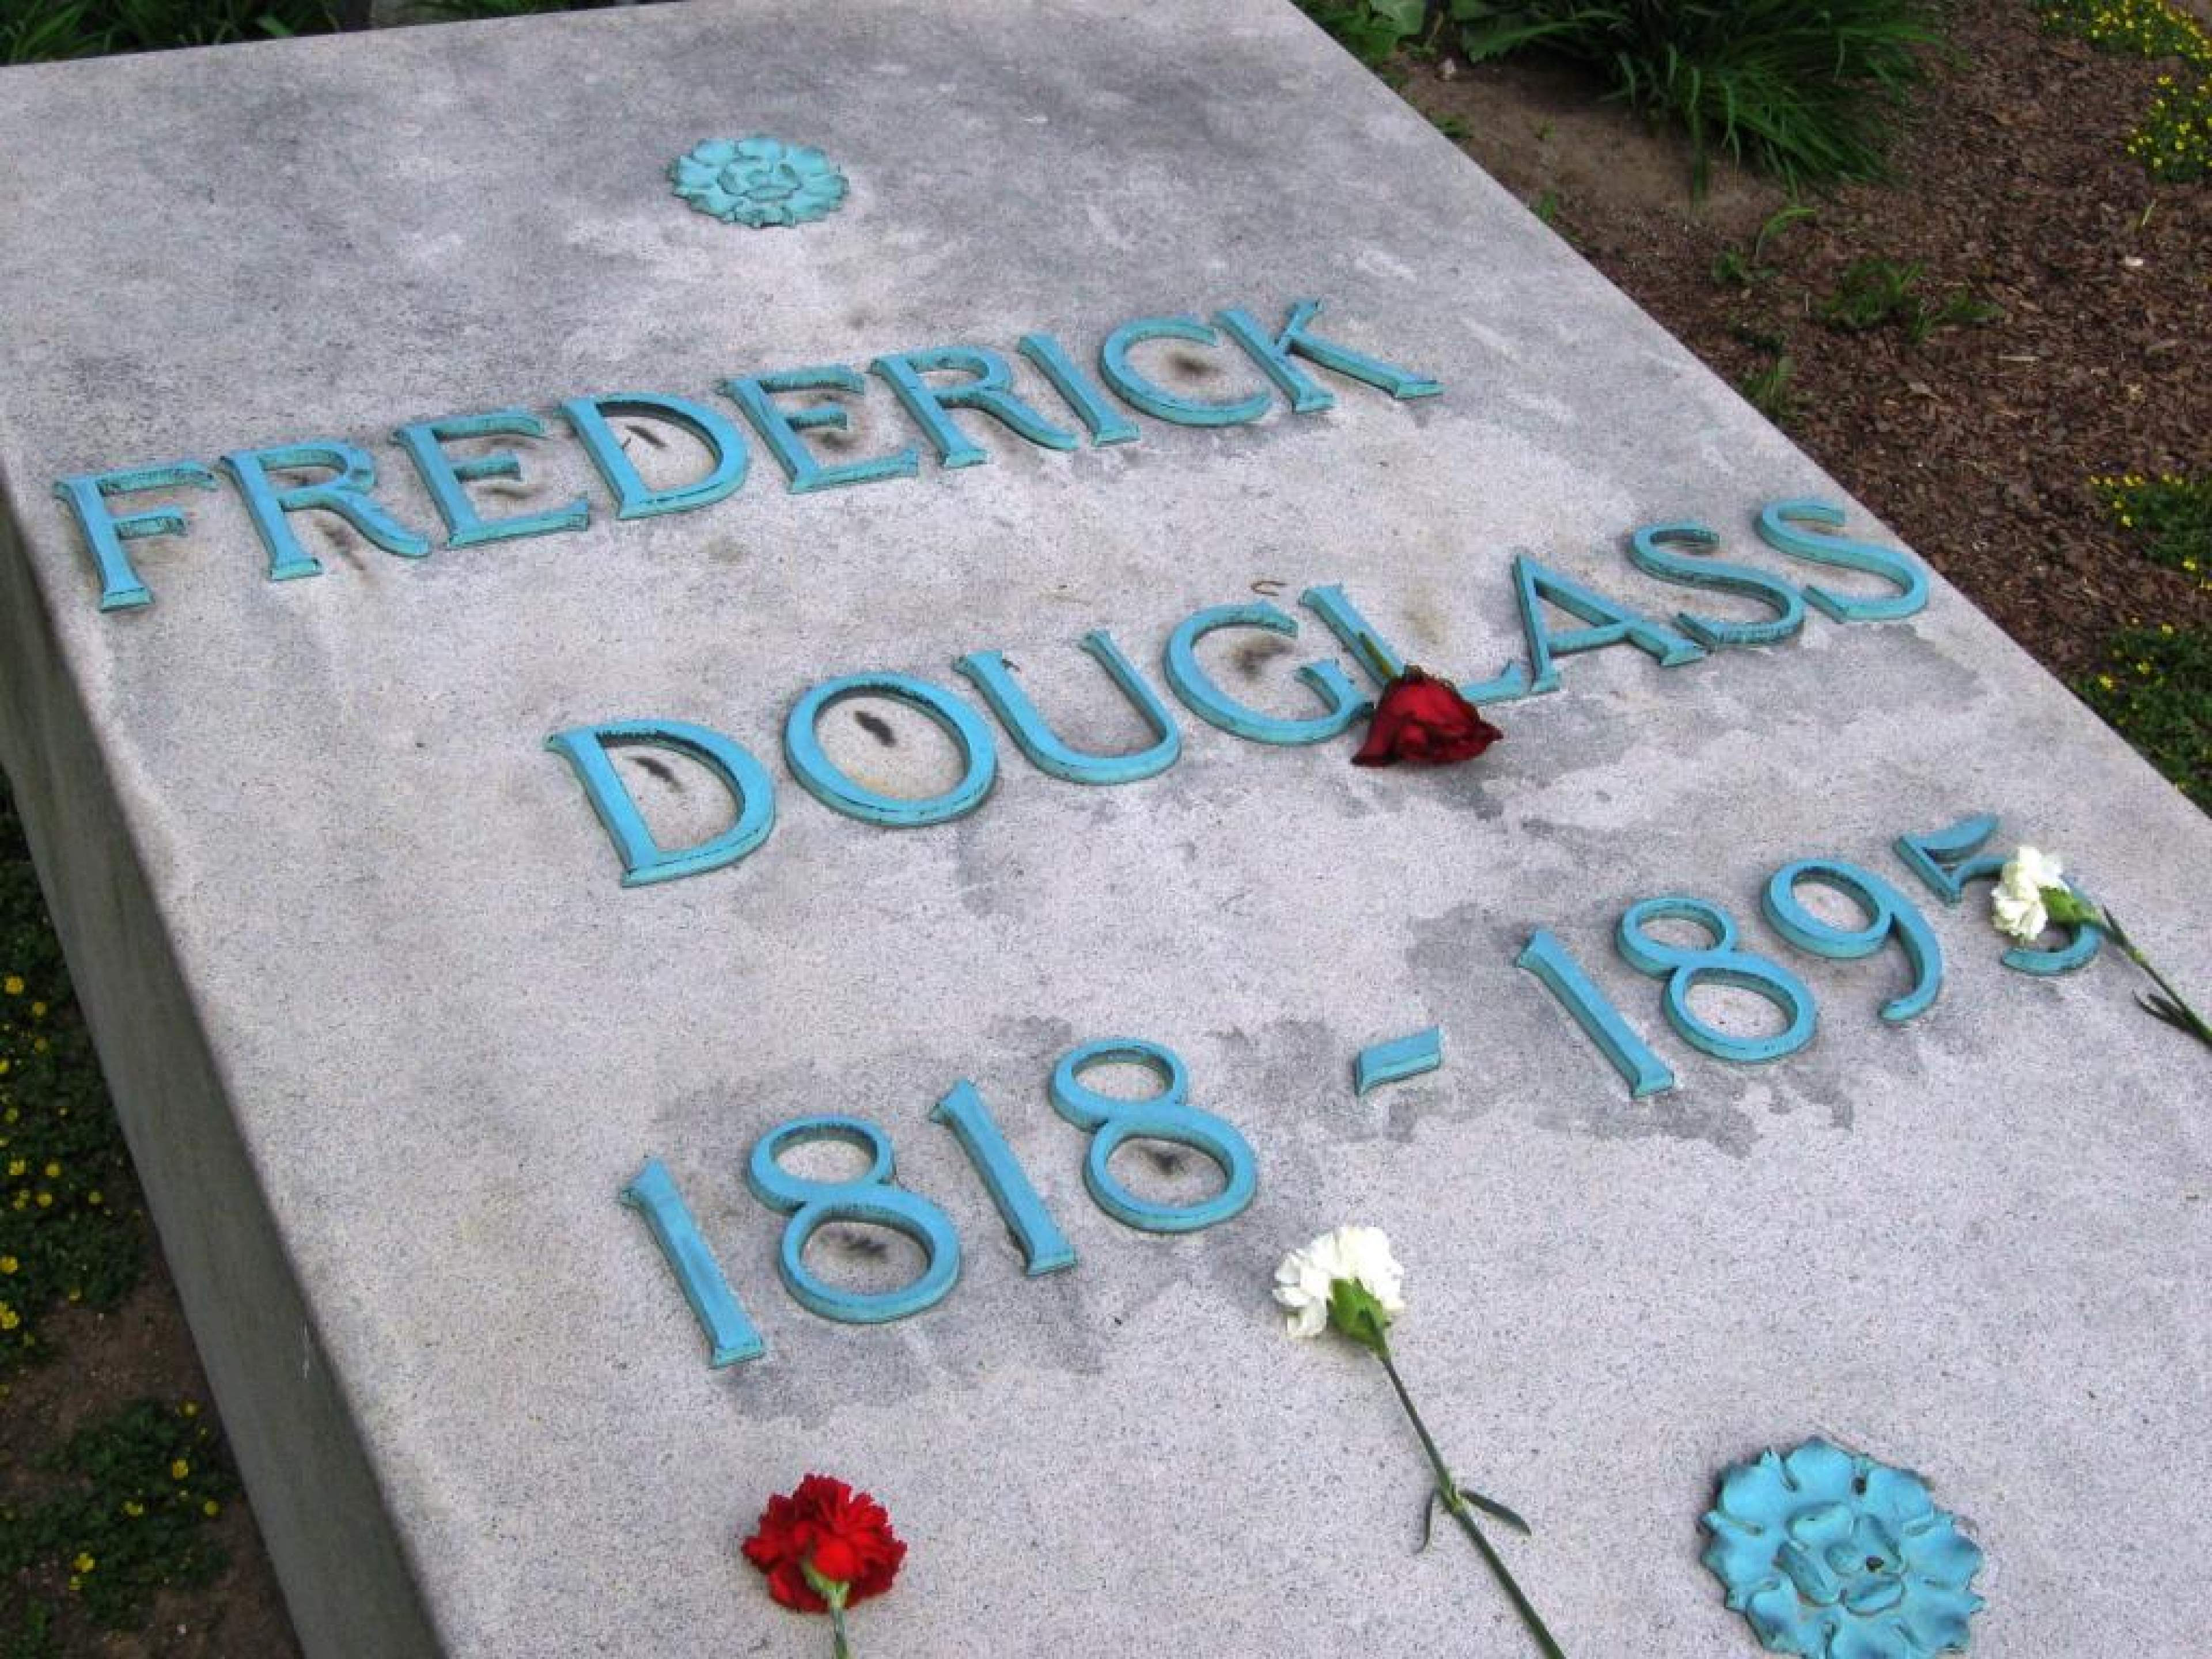 Frederick Douglass Grave Site - Freethought Trail - New York